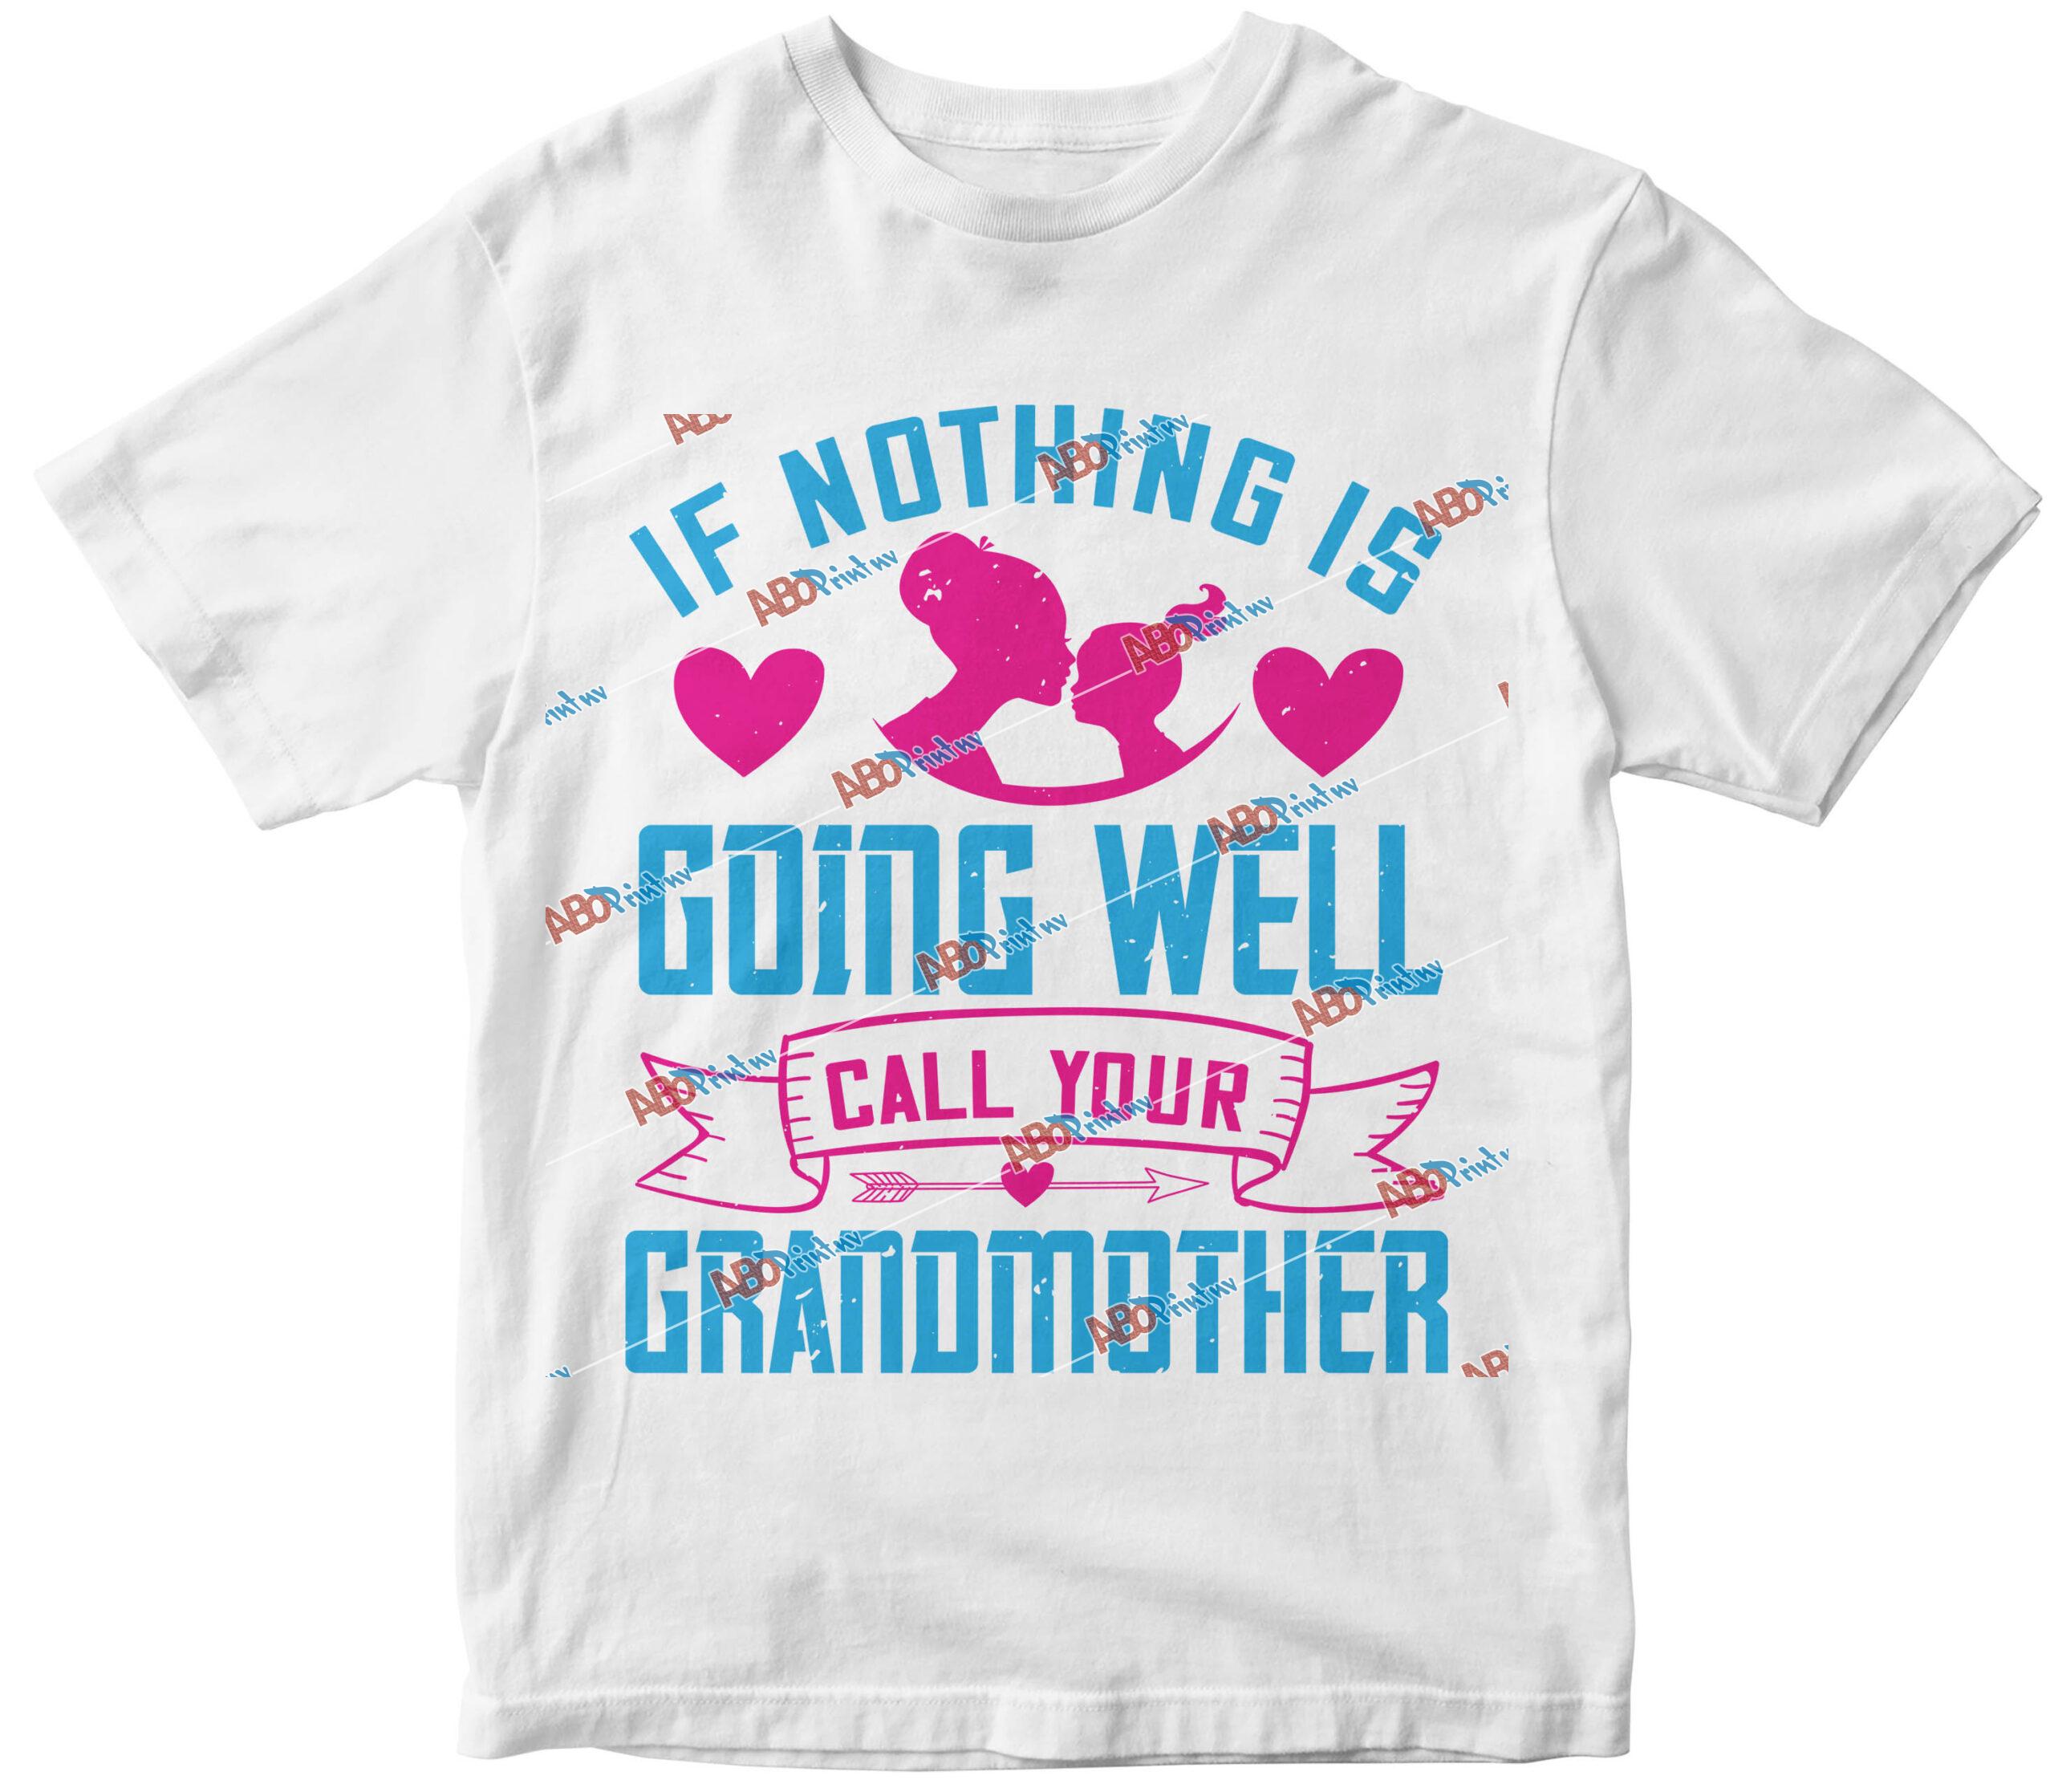 If nothing is going well, call your grandmother.jpg